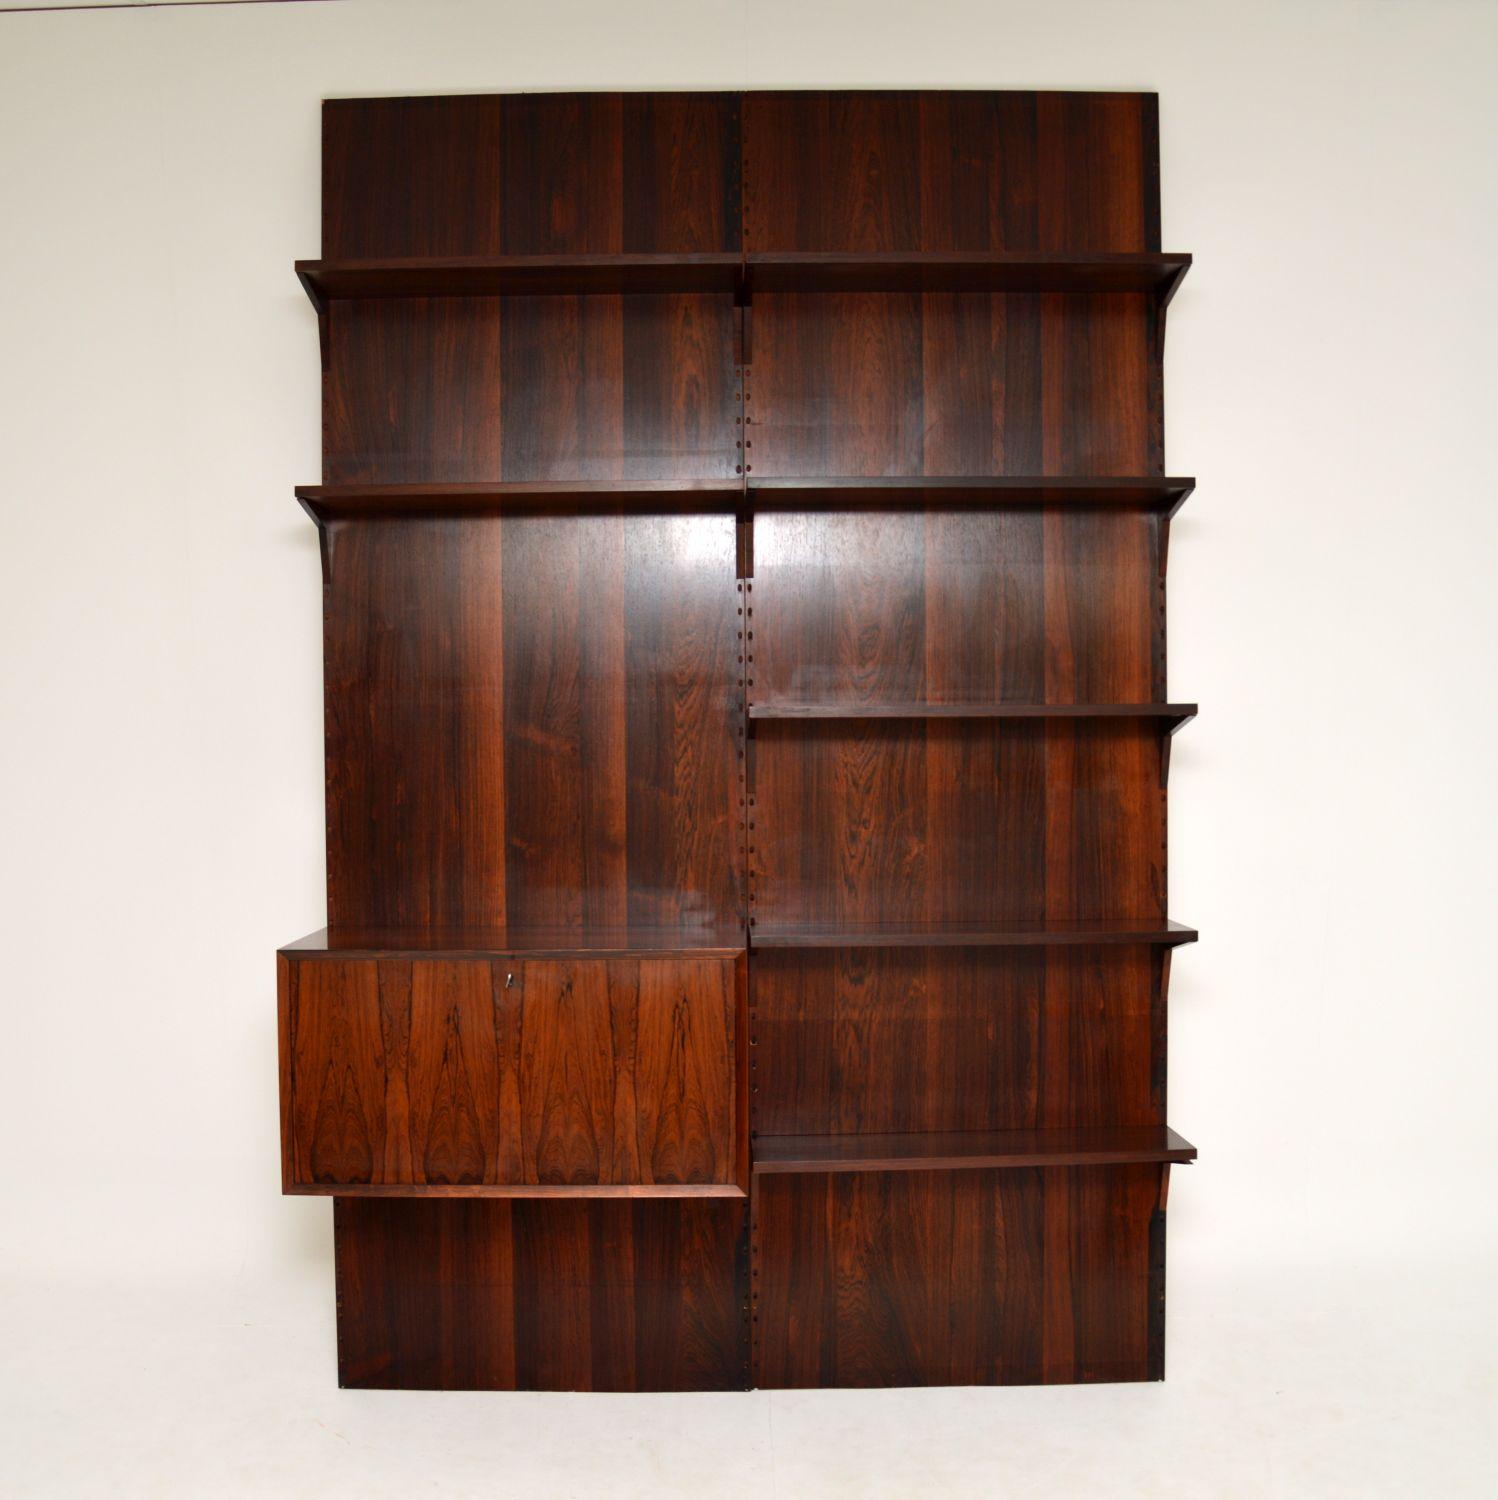 A stunning and rare vintage wood Royal Shelving system, designed by Poul Cadovius. This was made in Denmark, it dates from the 1960-70’s.

It is of absolutely superb quality, and is such a clever design. There are two large flat wood panels that